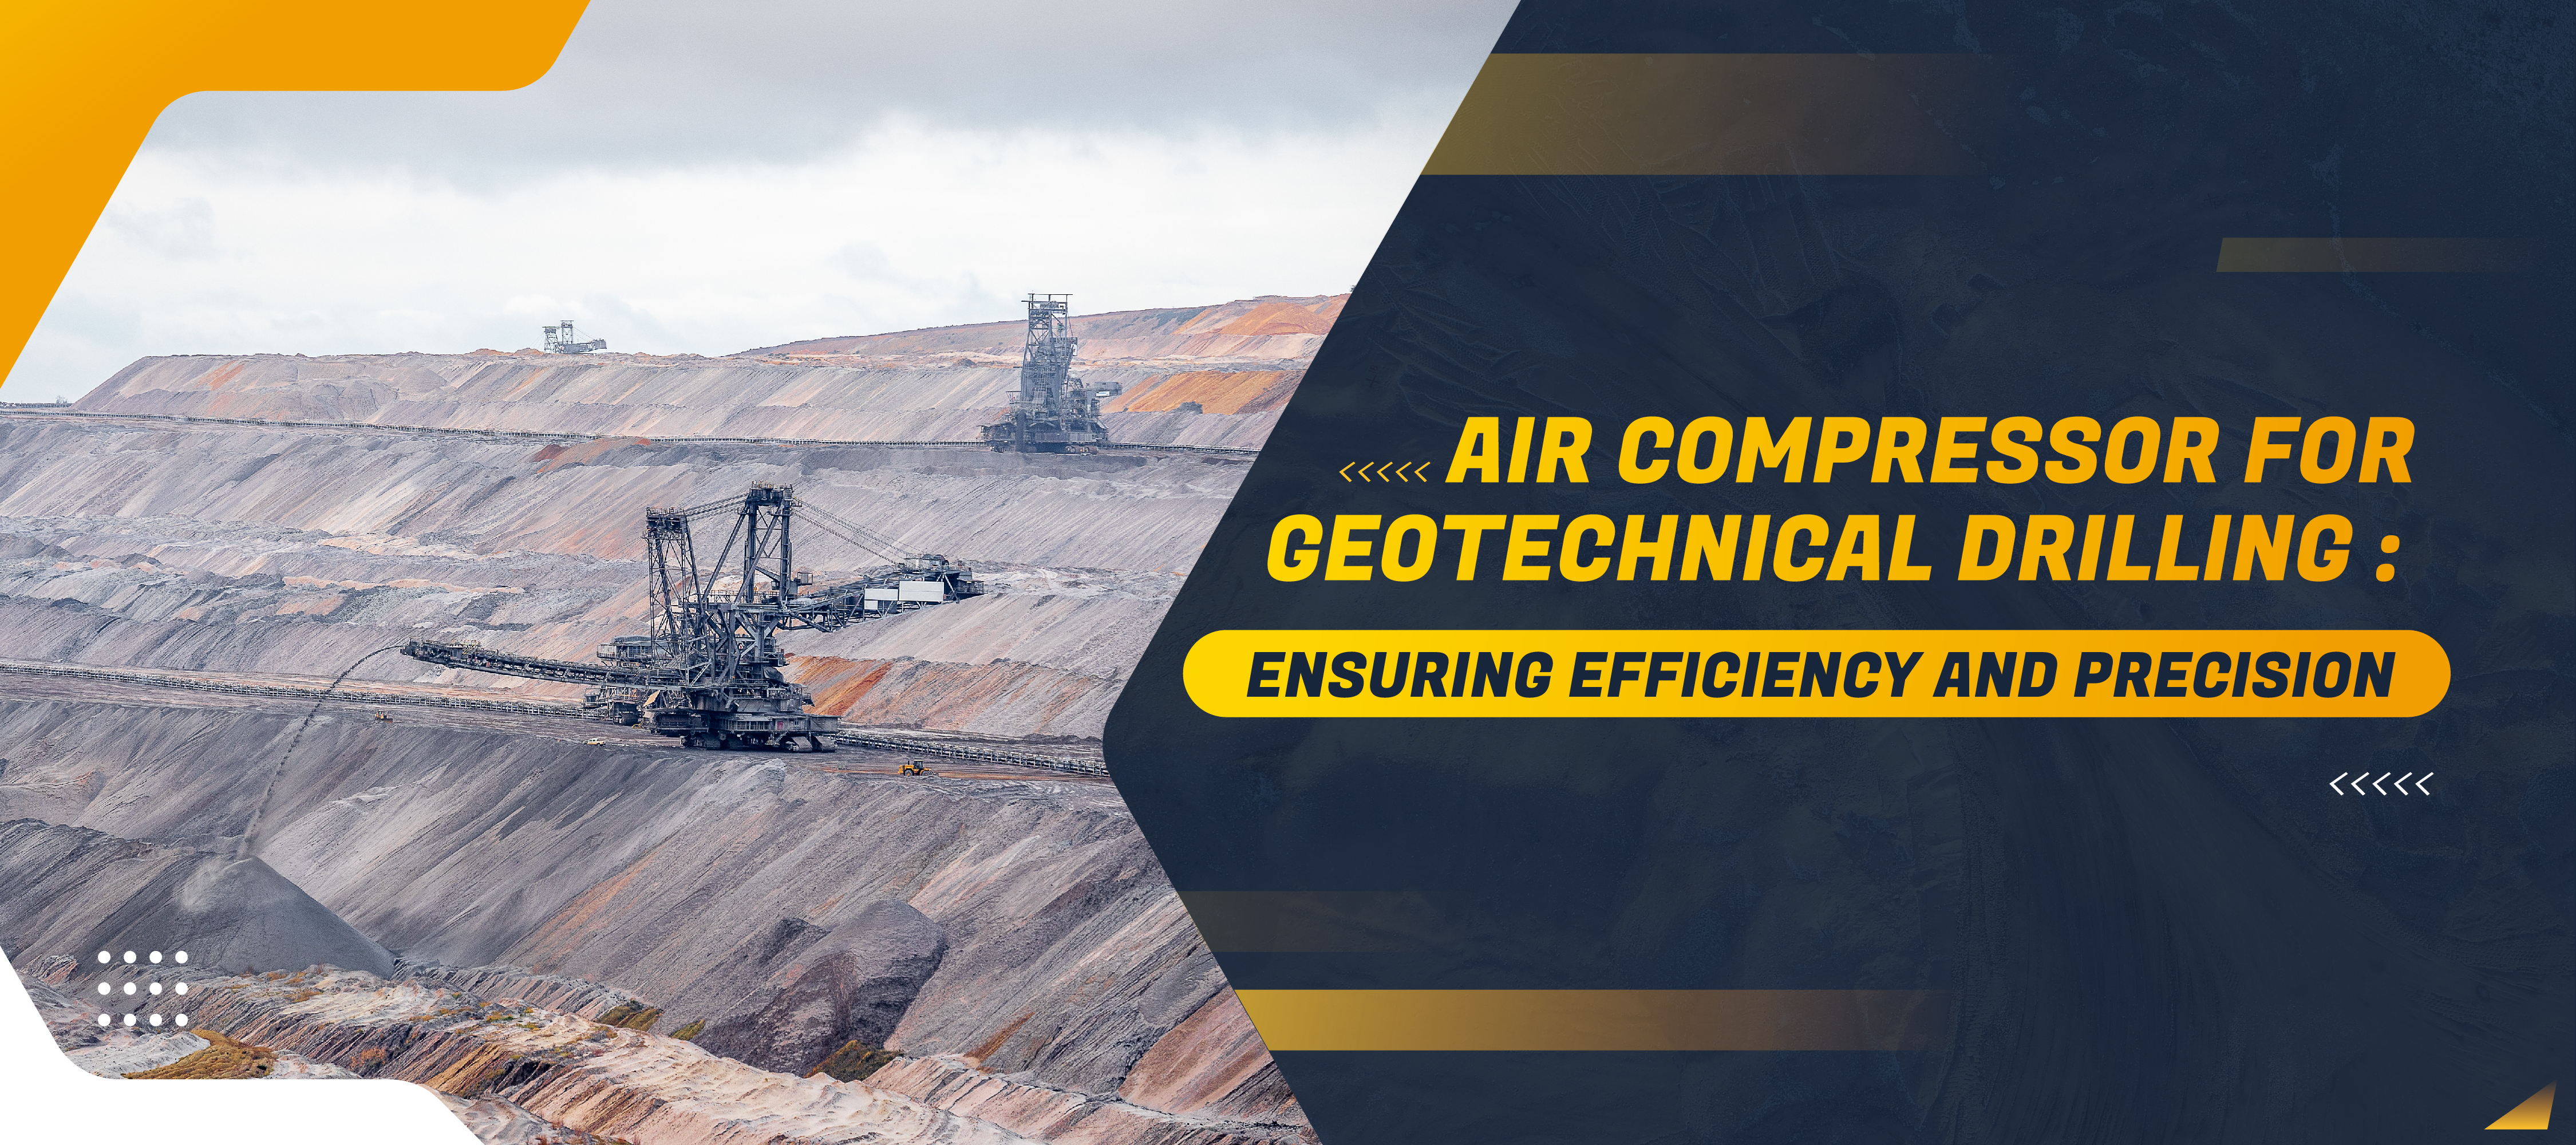 Air Compressors for Geotechnical Drilling